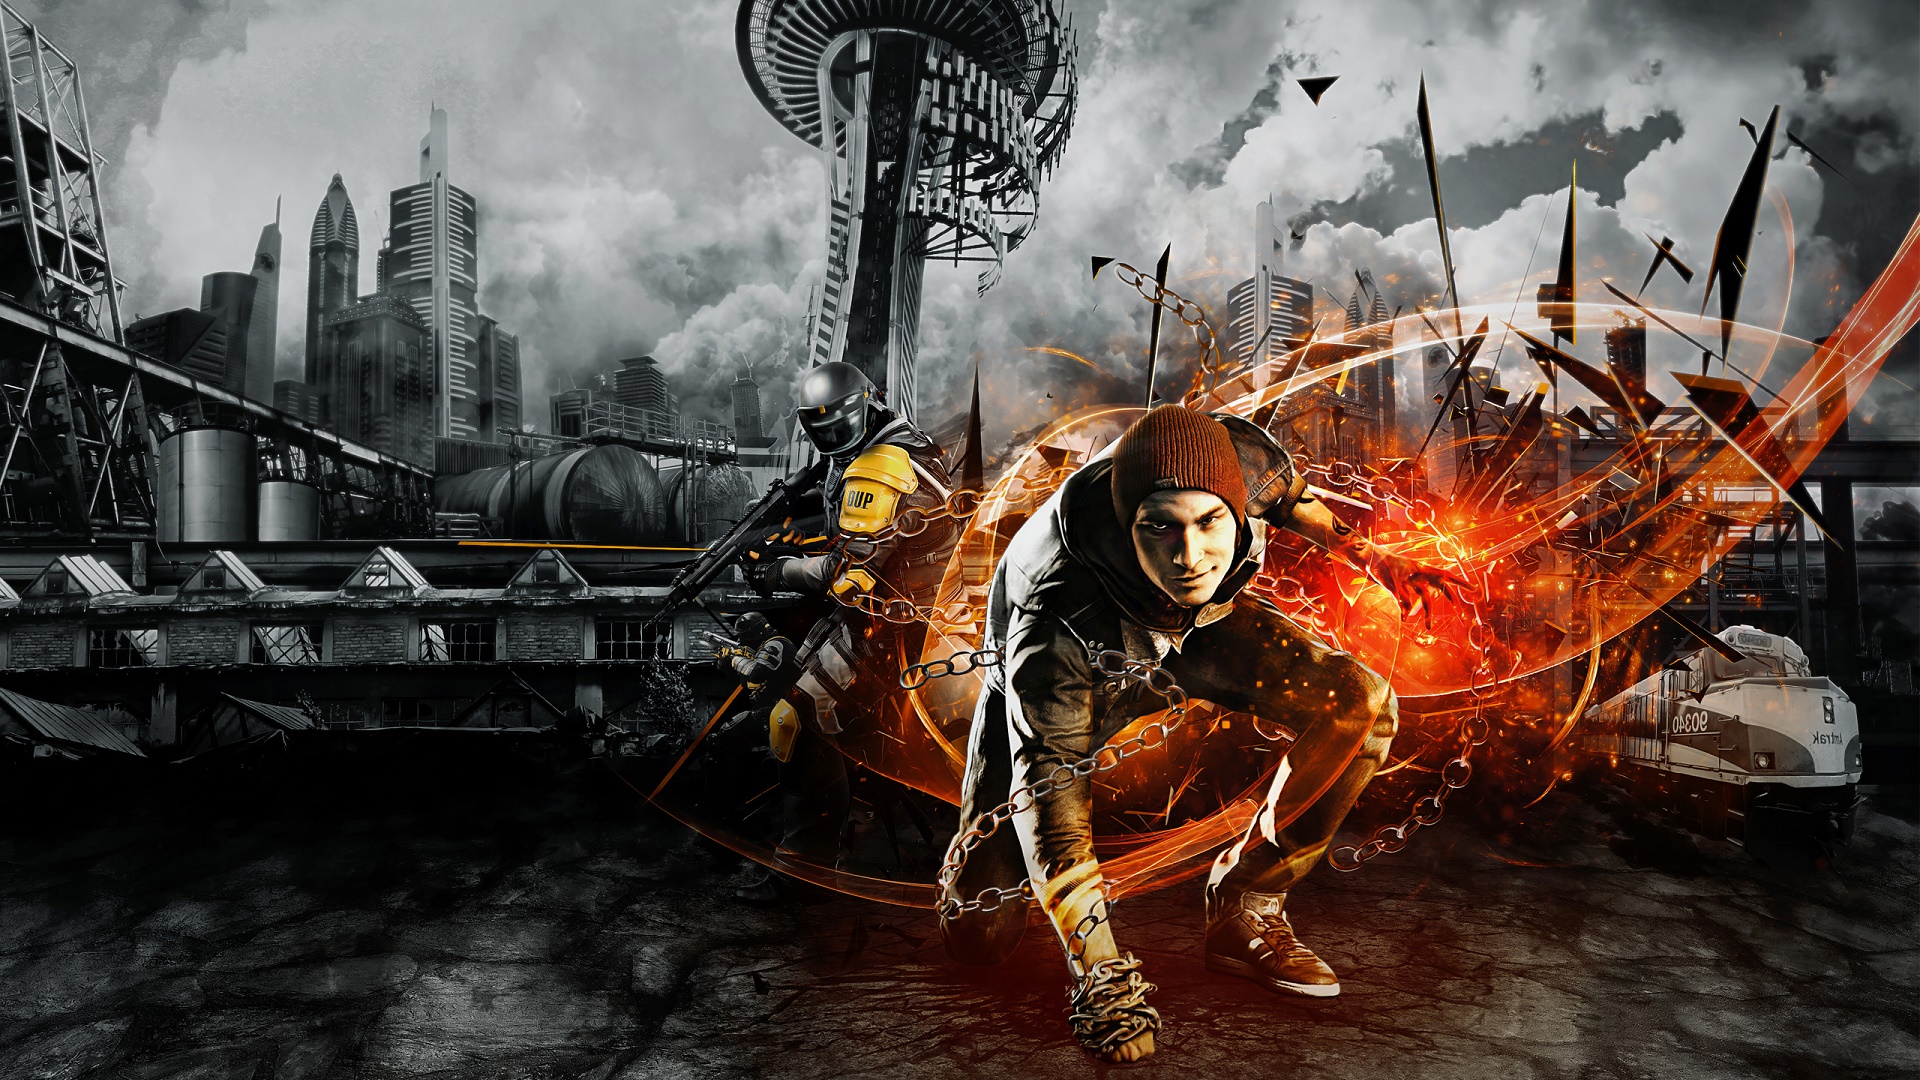 infamous second son wallpaper,action adventure game,pc game,cg artwork,games,strategy video game